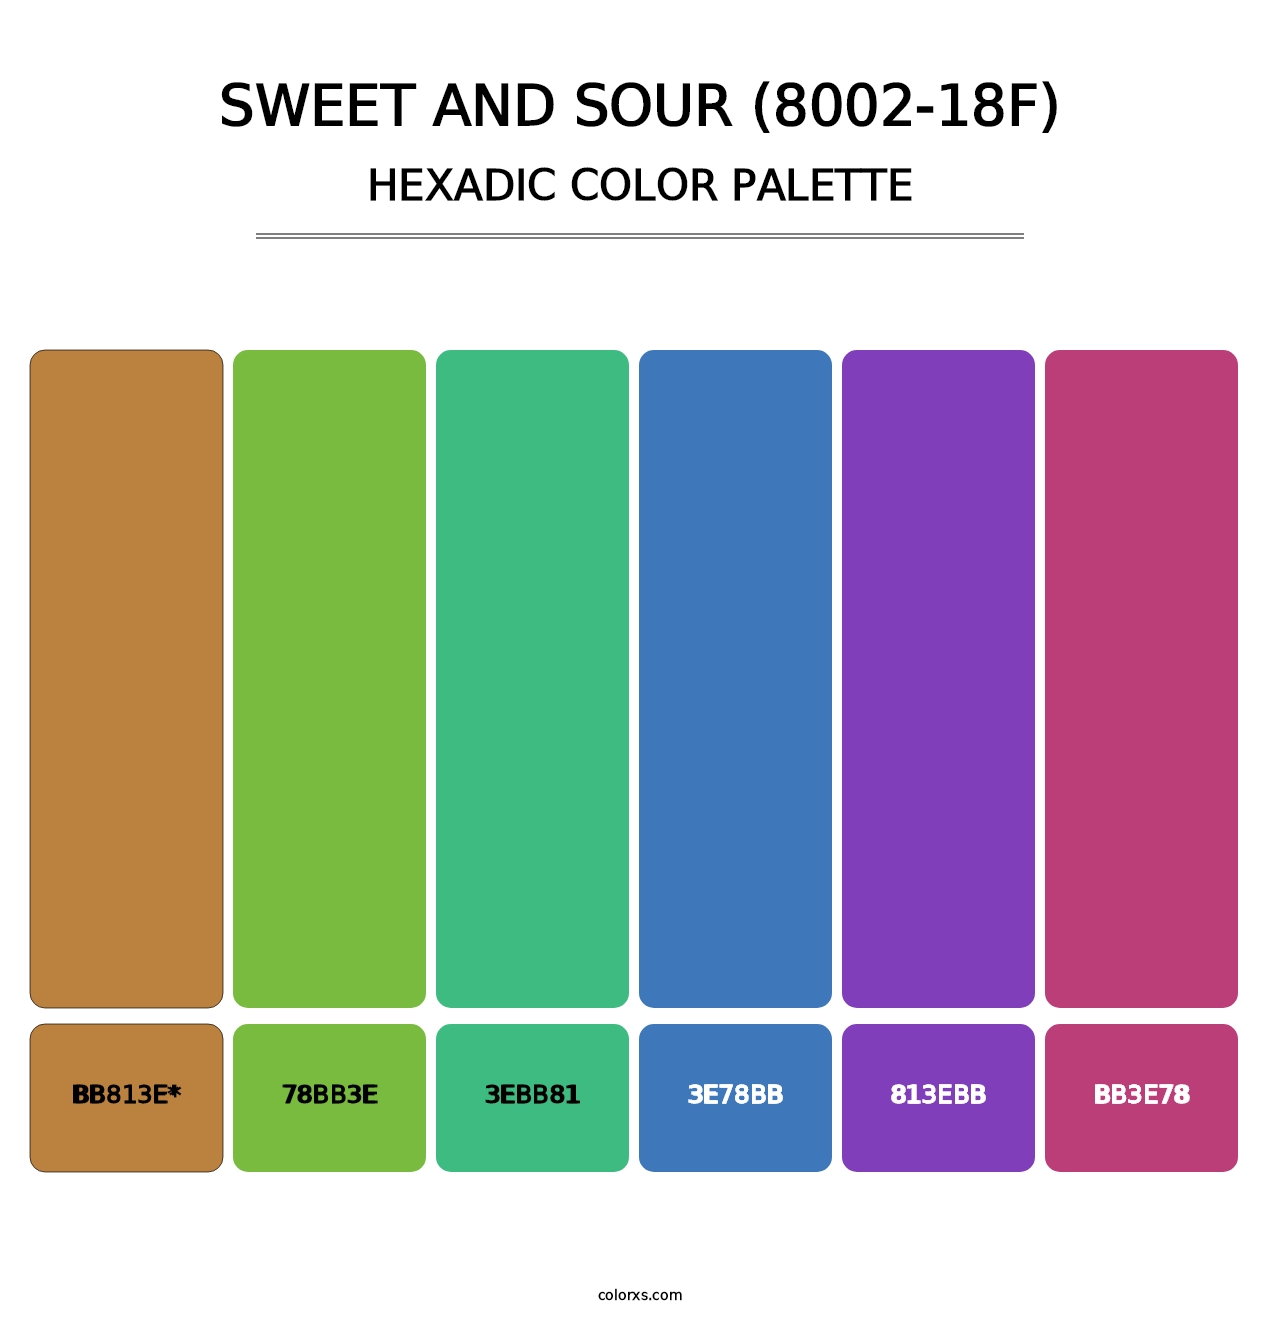 Sweet and Sour (8002-18F) - Hexadic Color Palette